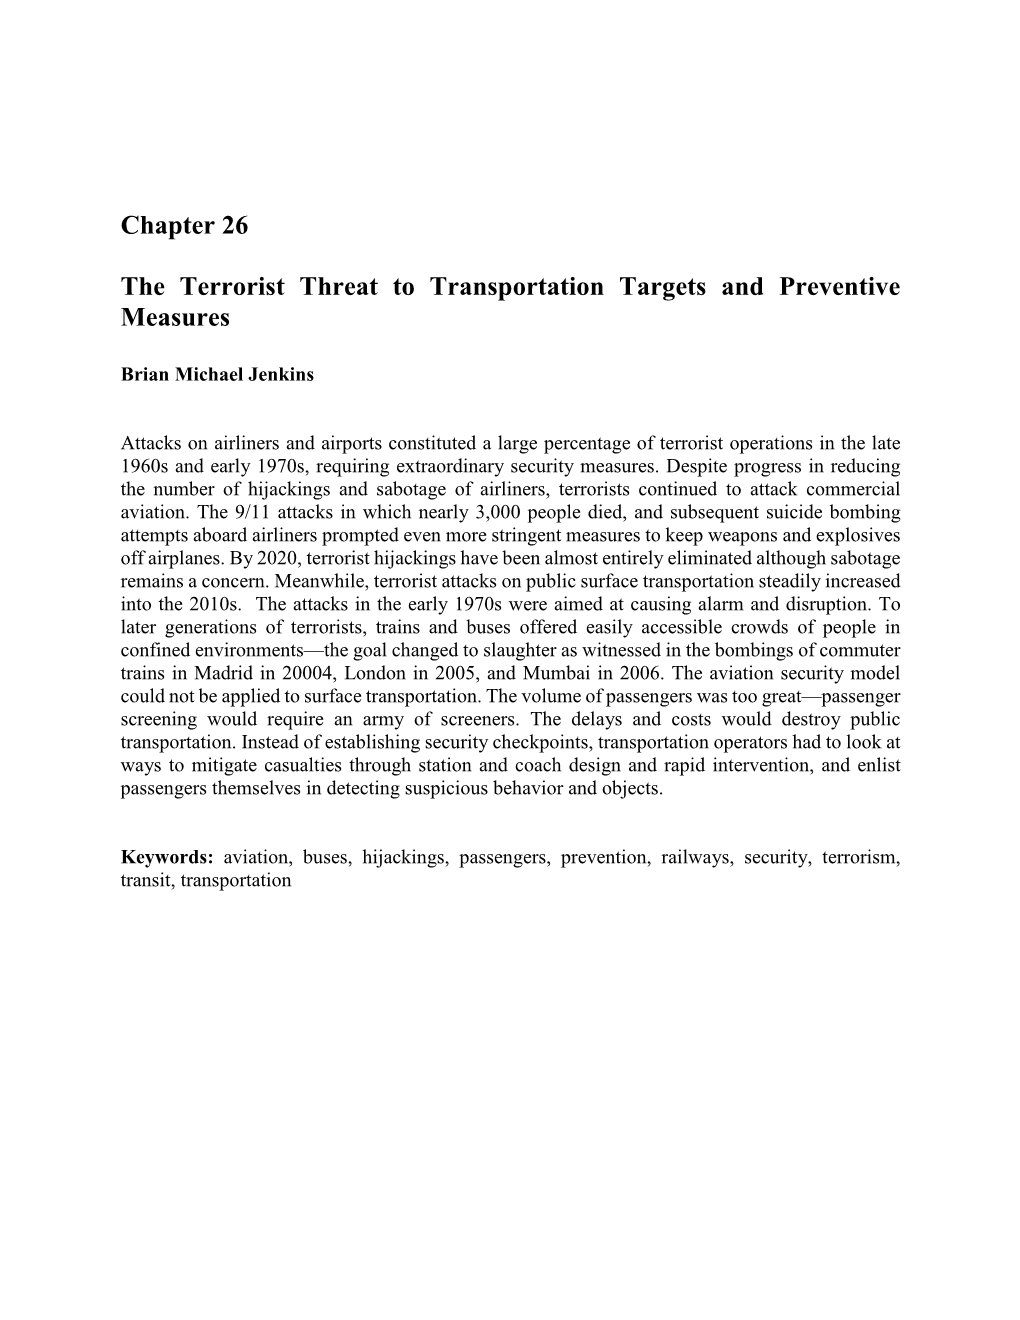 Chapter 26 the Terrorist Threat to Transportation Targets And